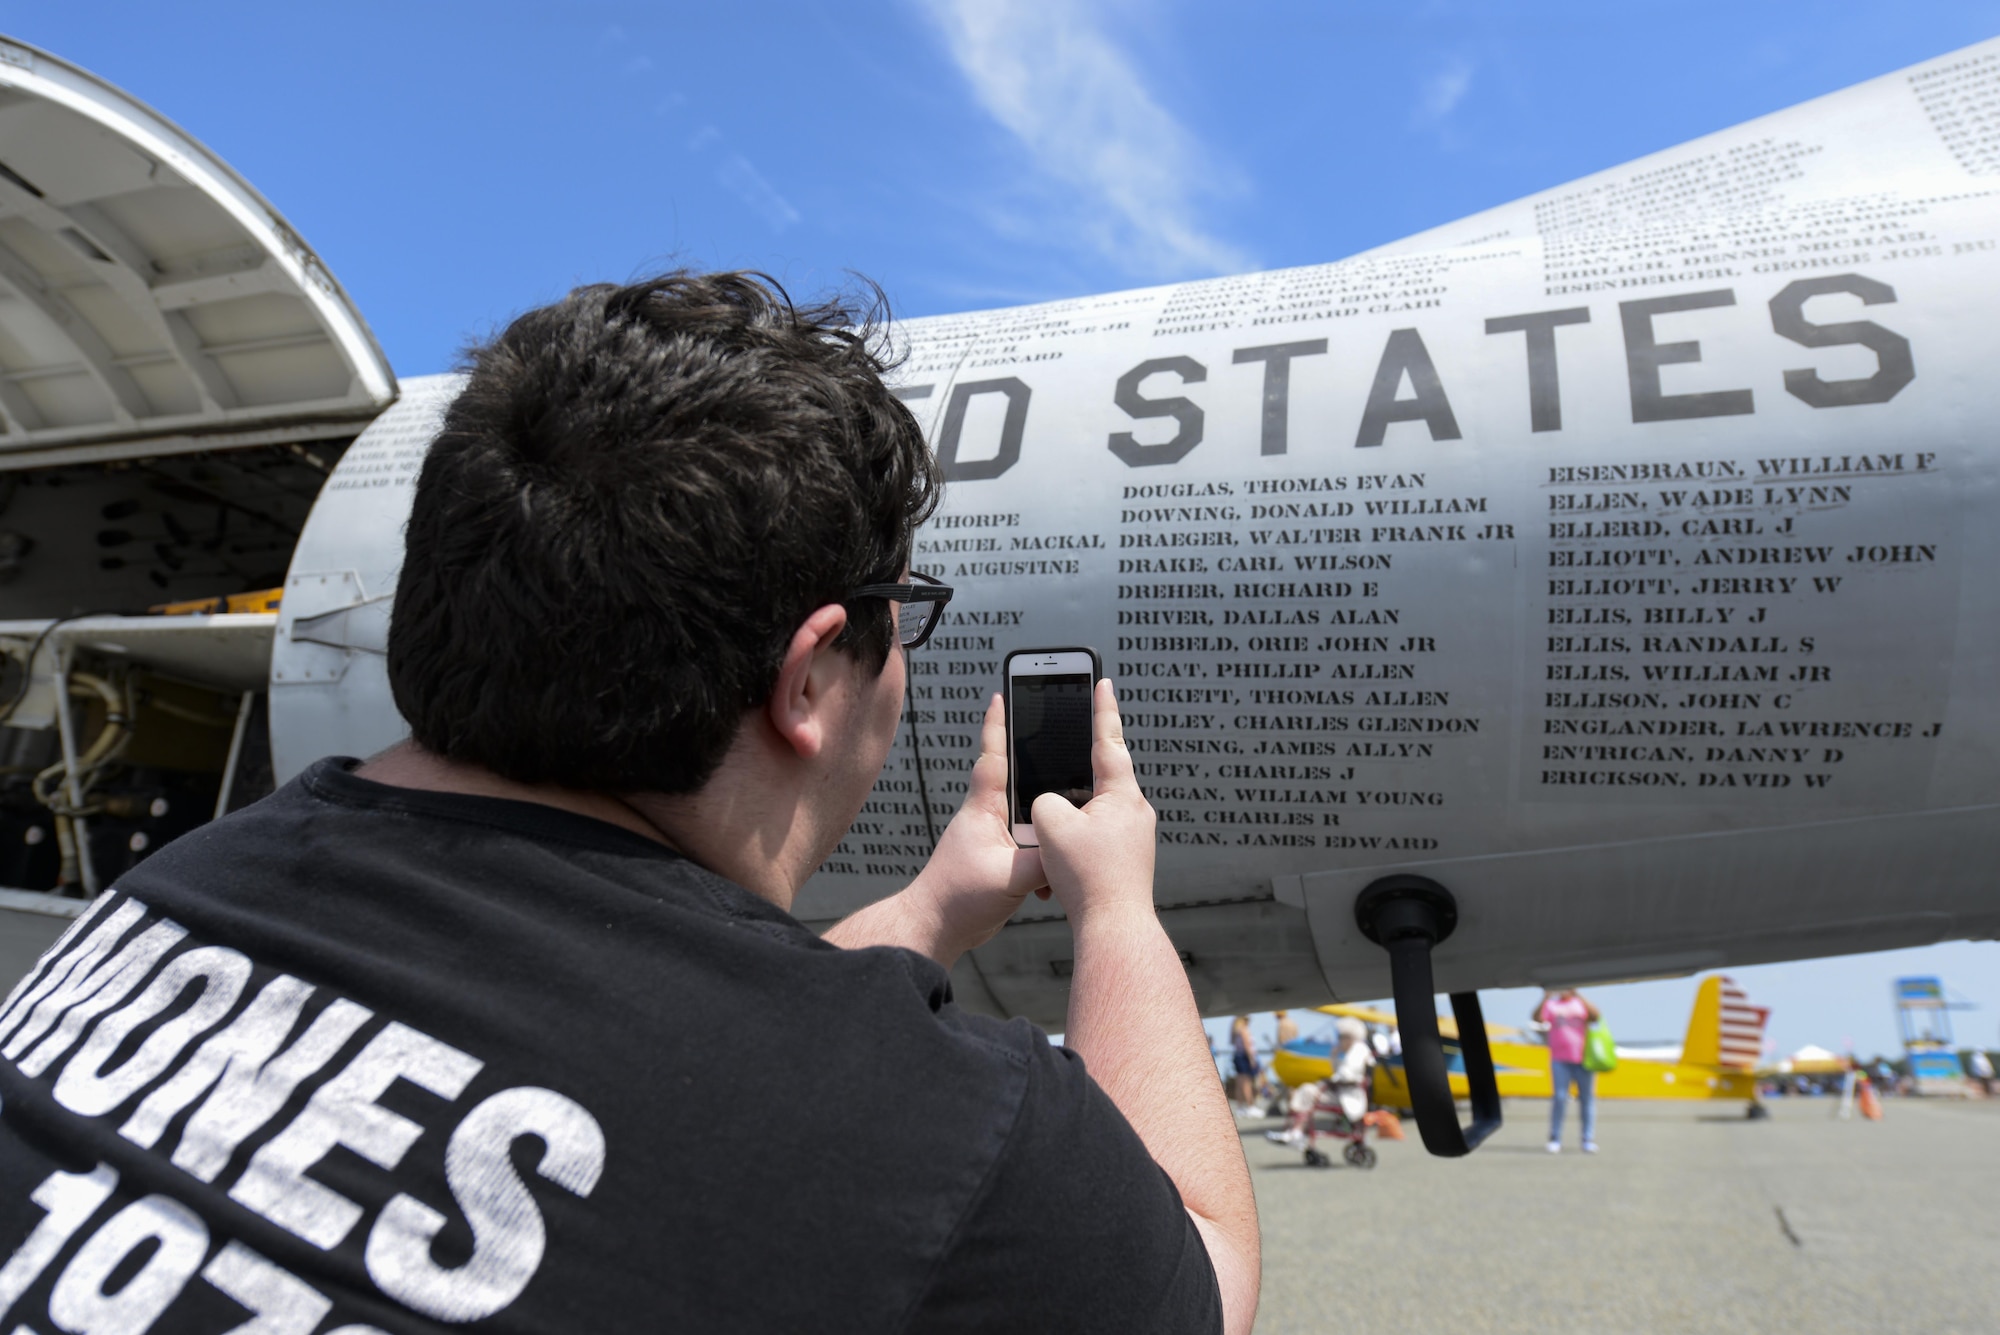 A guest of Team Dover takes photos of names on Mohawk Airshow’s Army OV-1 Mohawk Vietnam POW/MIA flying monument. The Army flew the OV-1 during the Vietnam War through Operation Desert Storm to gather battlefield surveillance and provide light strike capabilities. (U.S. Air Force photo by Staff Sgt. Aaron J. Jenne)